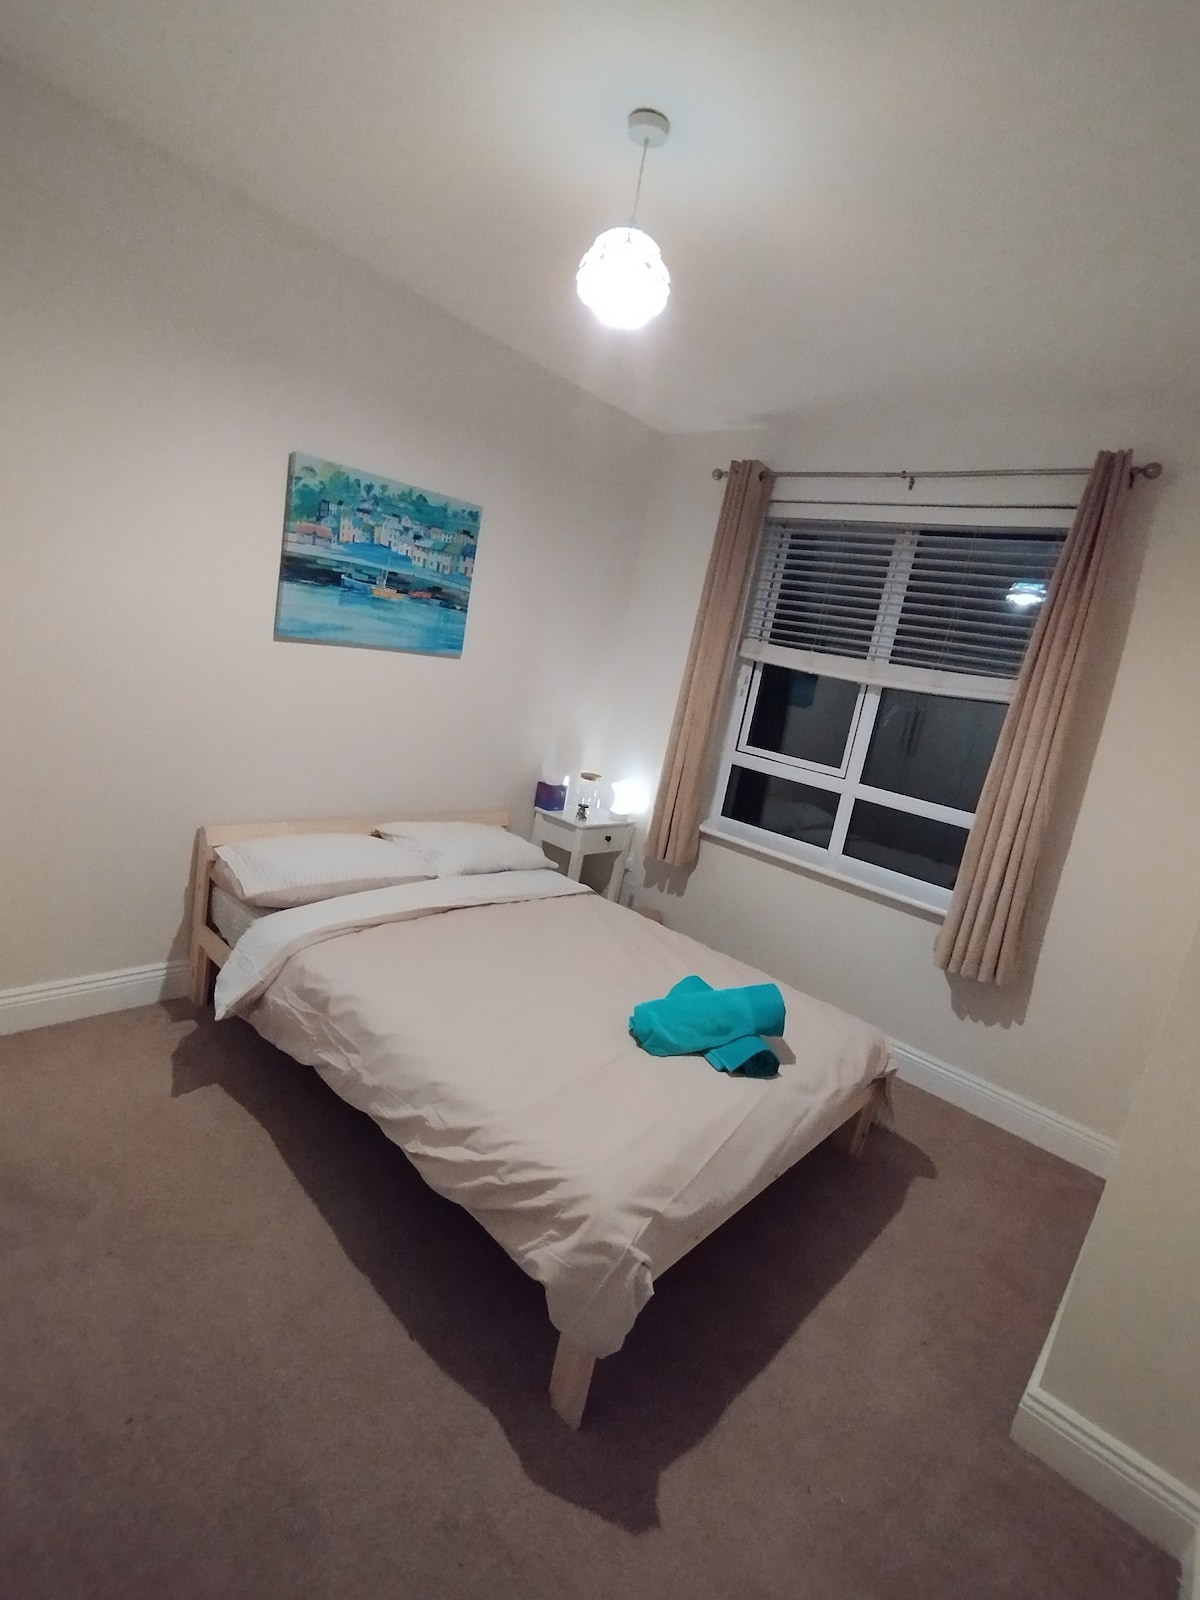 Double bed, private bathroom, near shops & airport